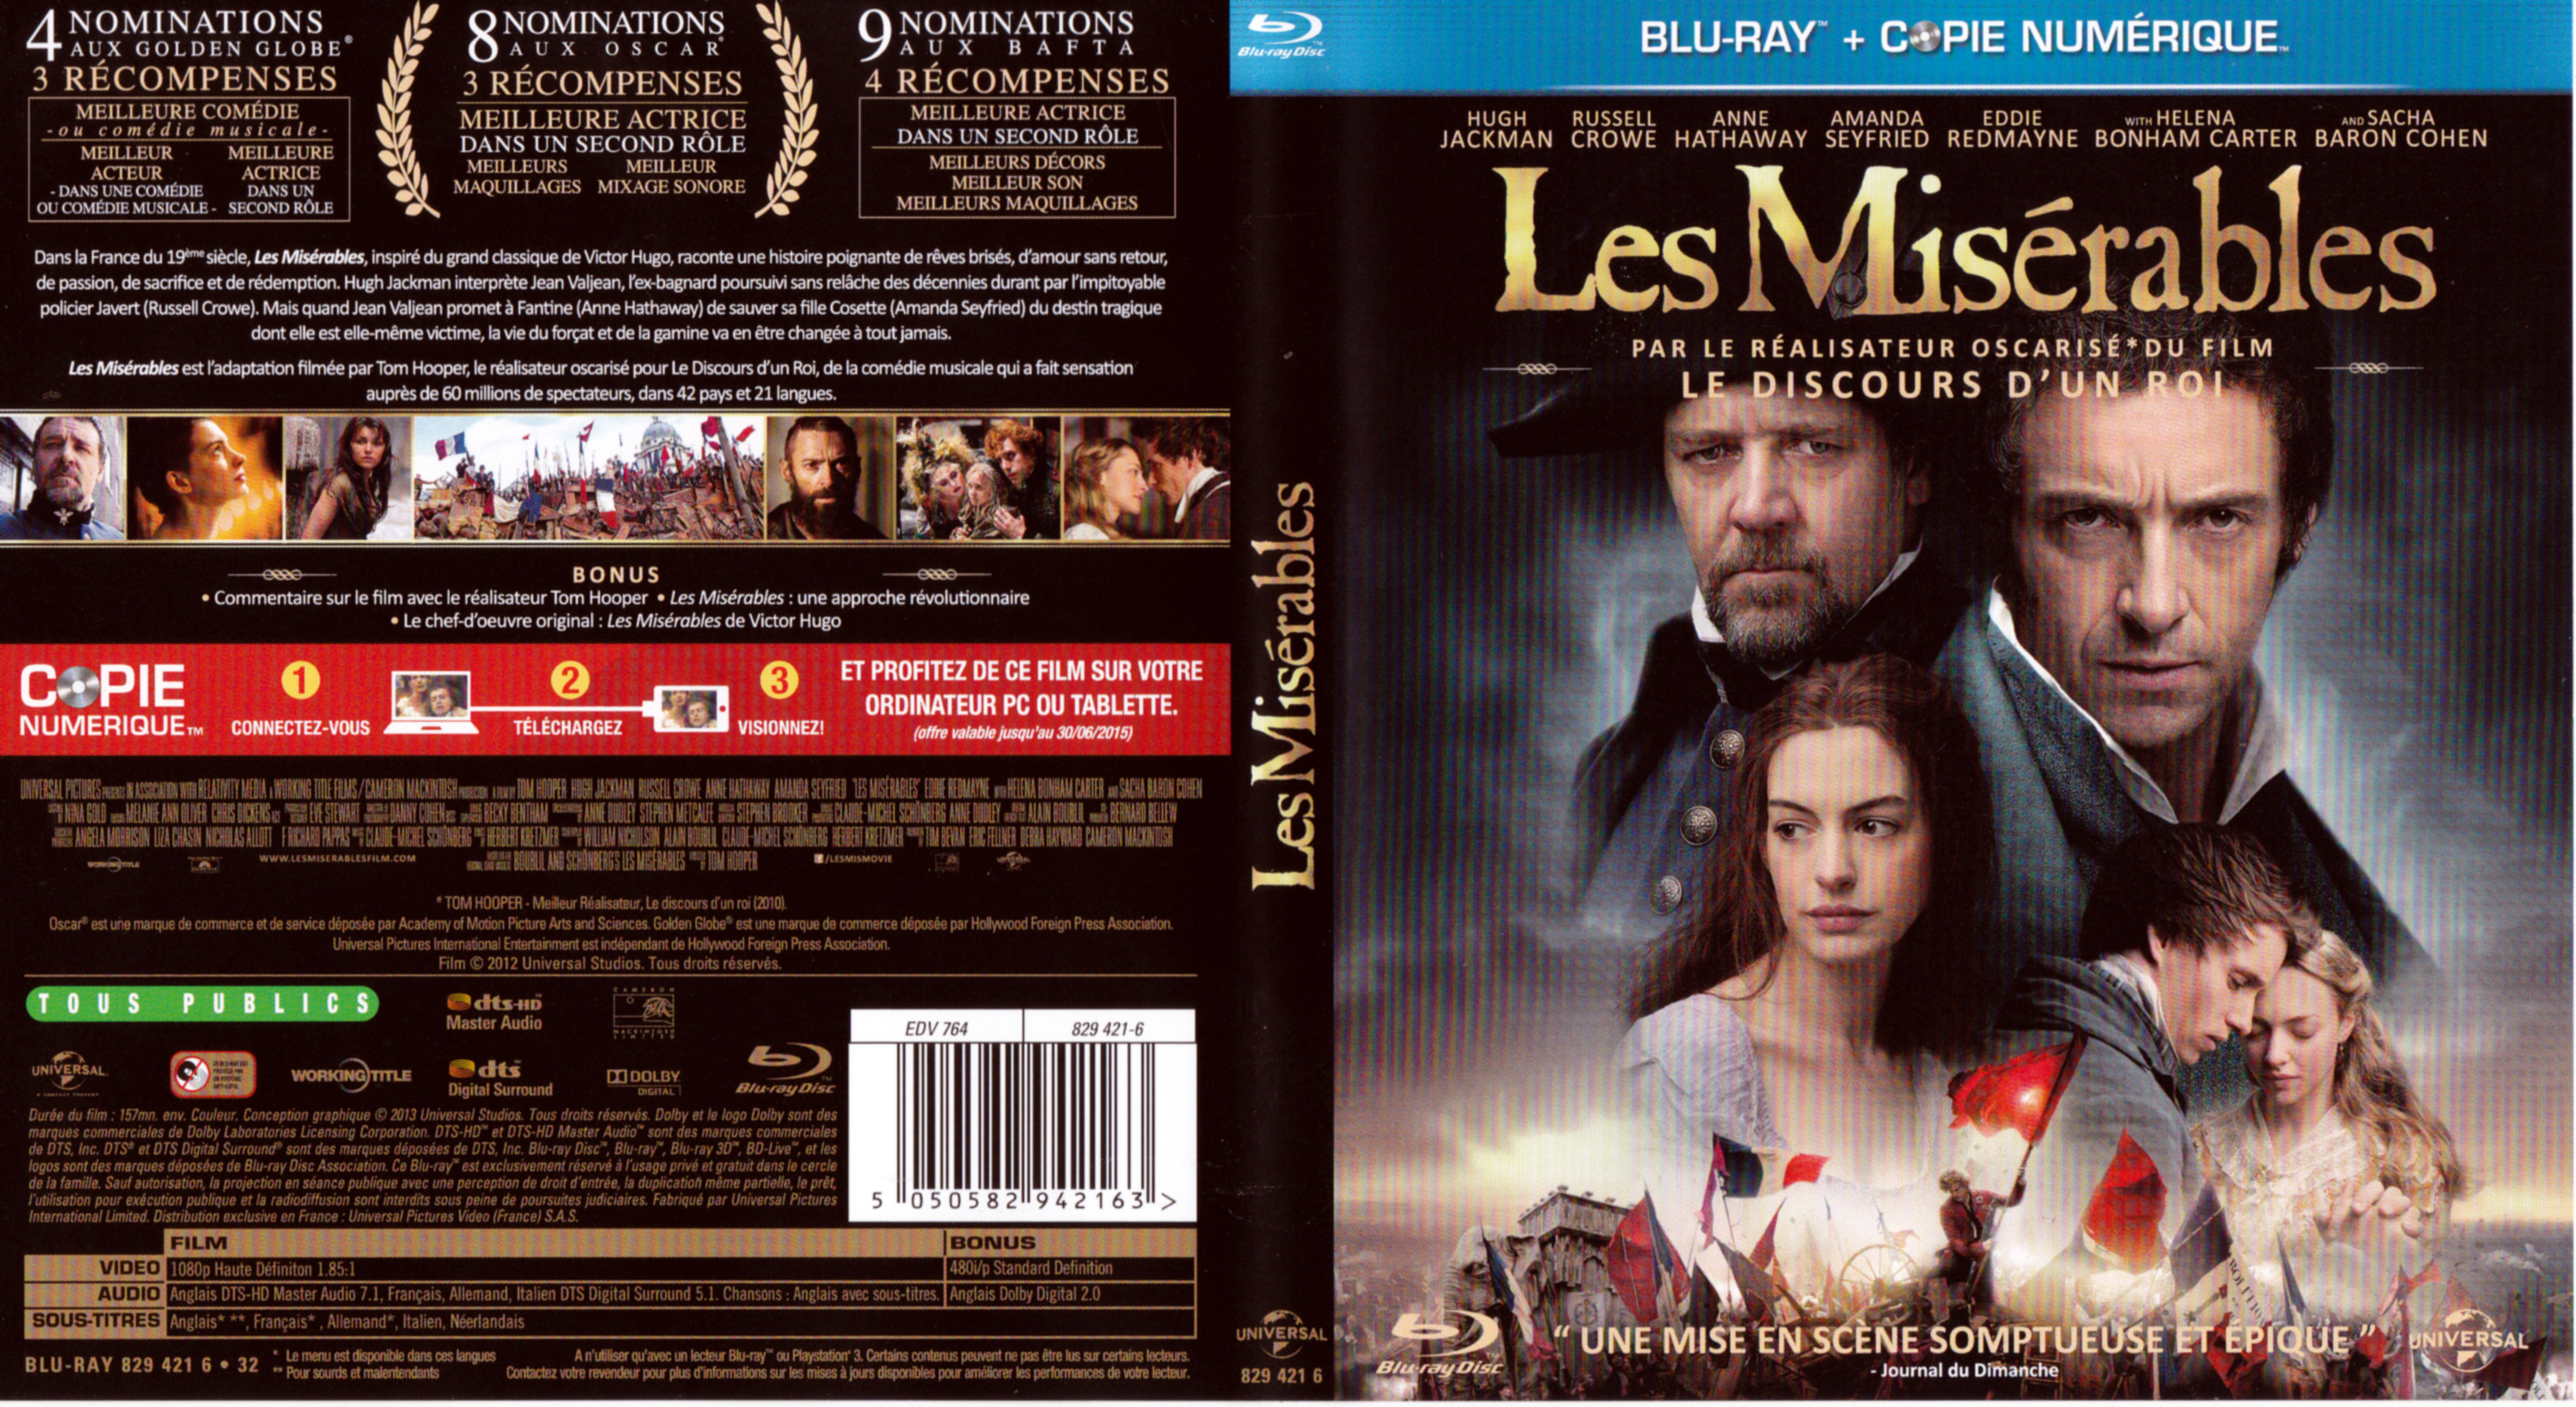 Jaquette DVD Les misrables (2013) (BLU-RAY)